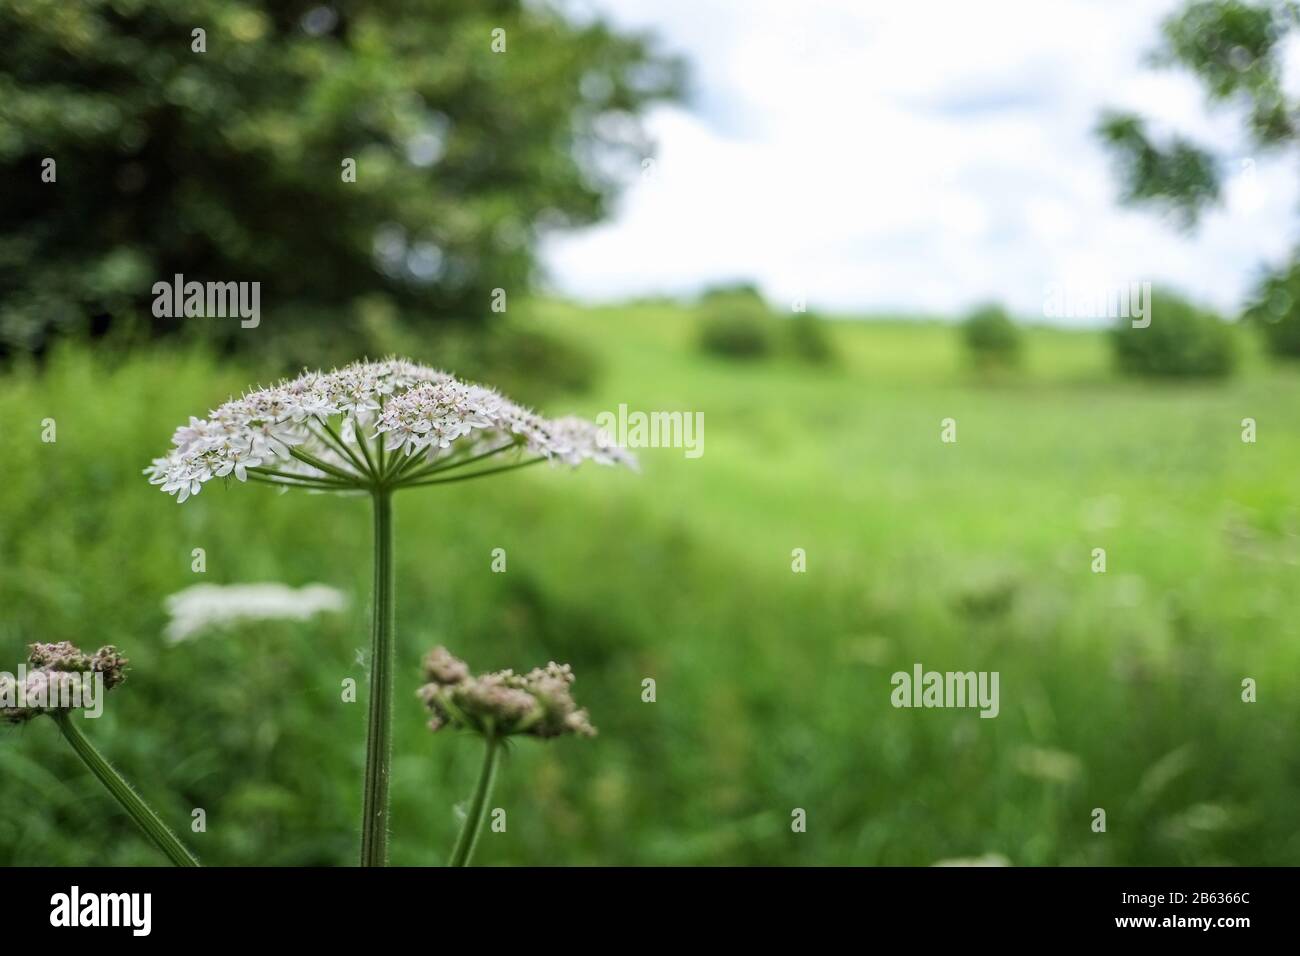 Soft focus view of cow parsley Stock Photo